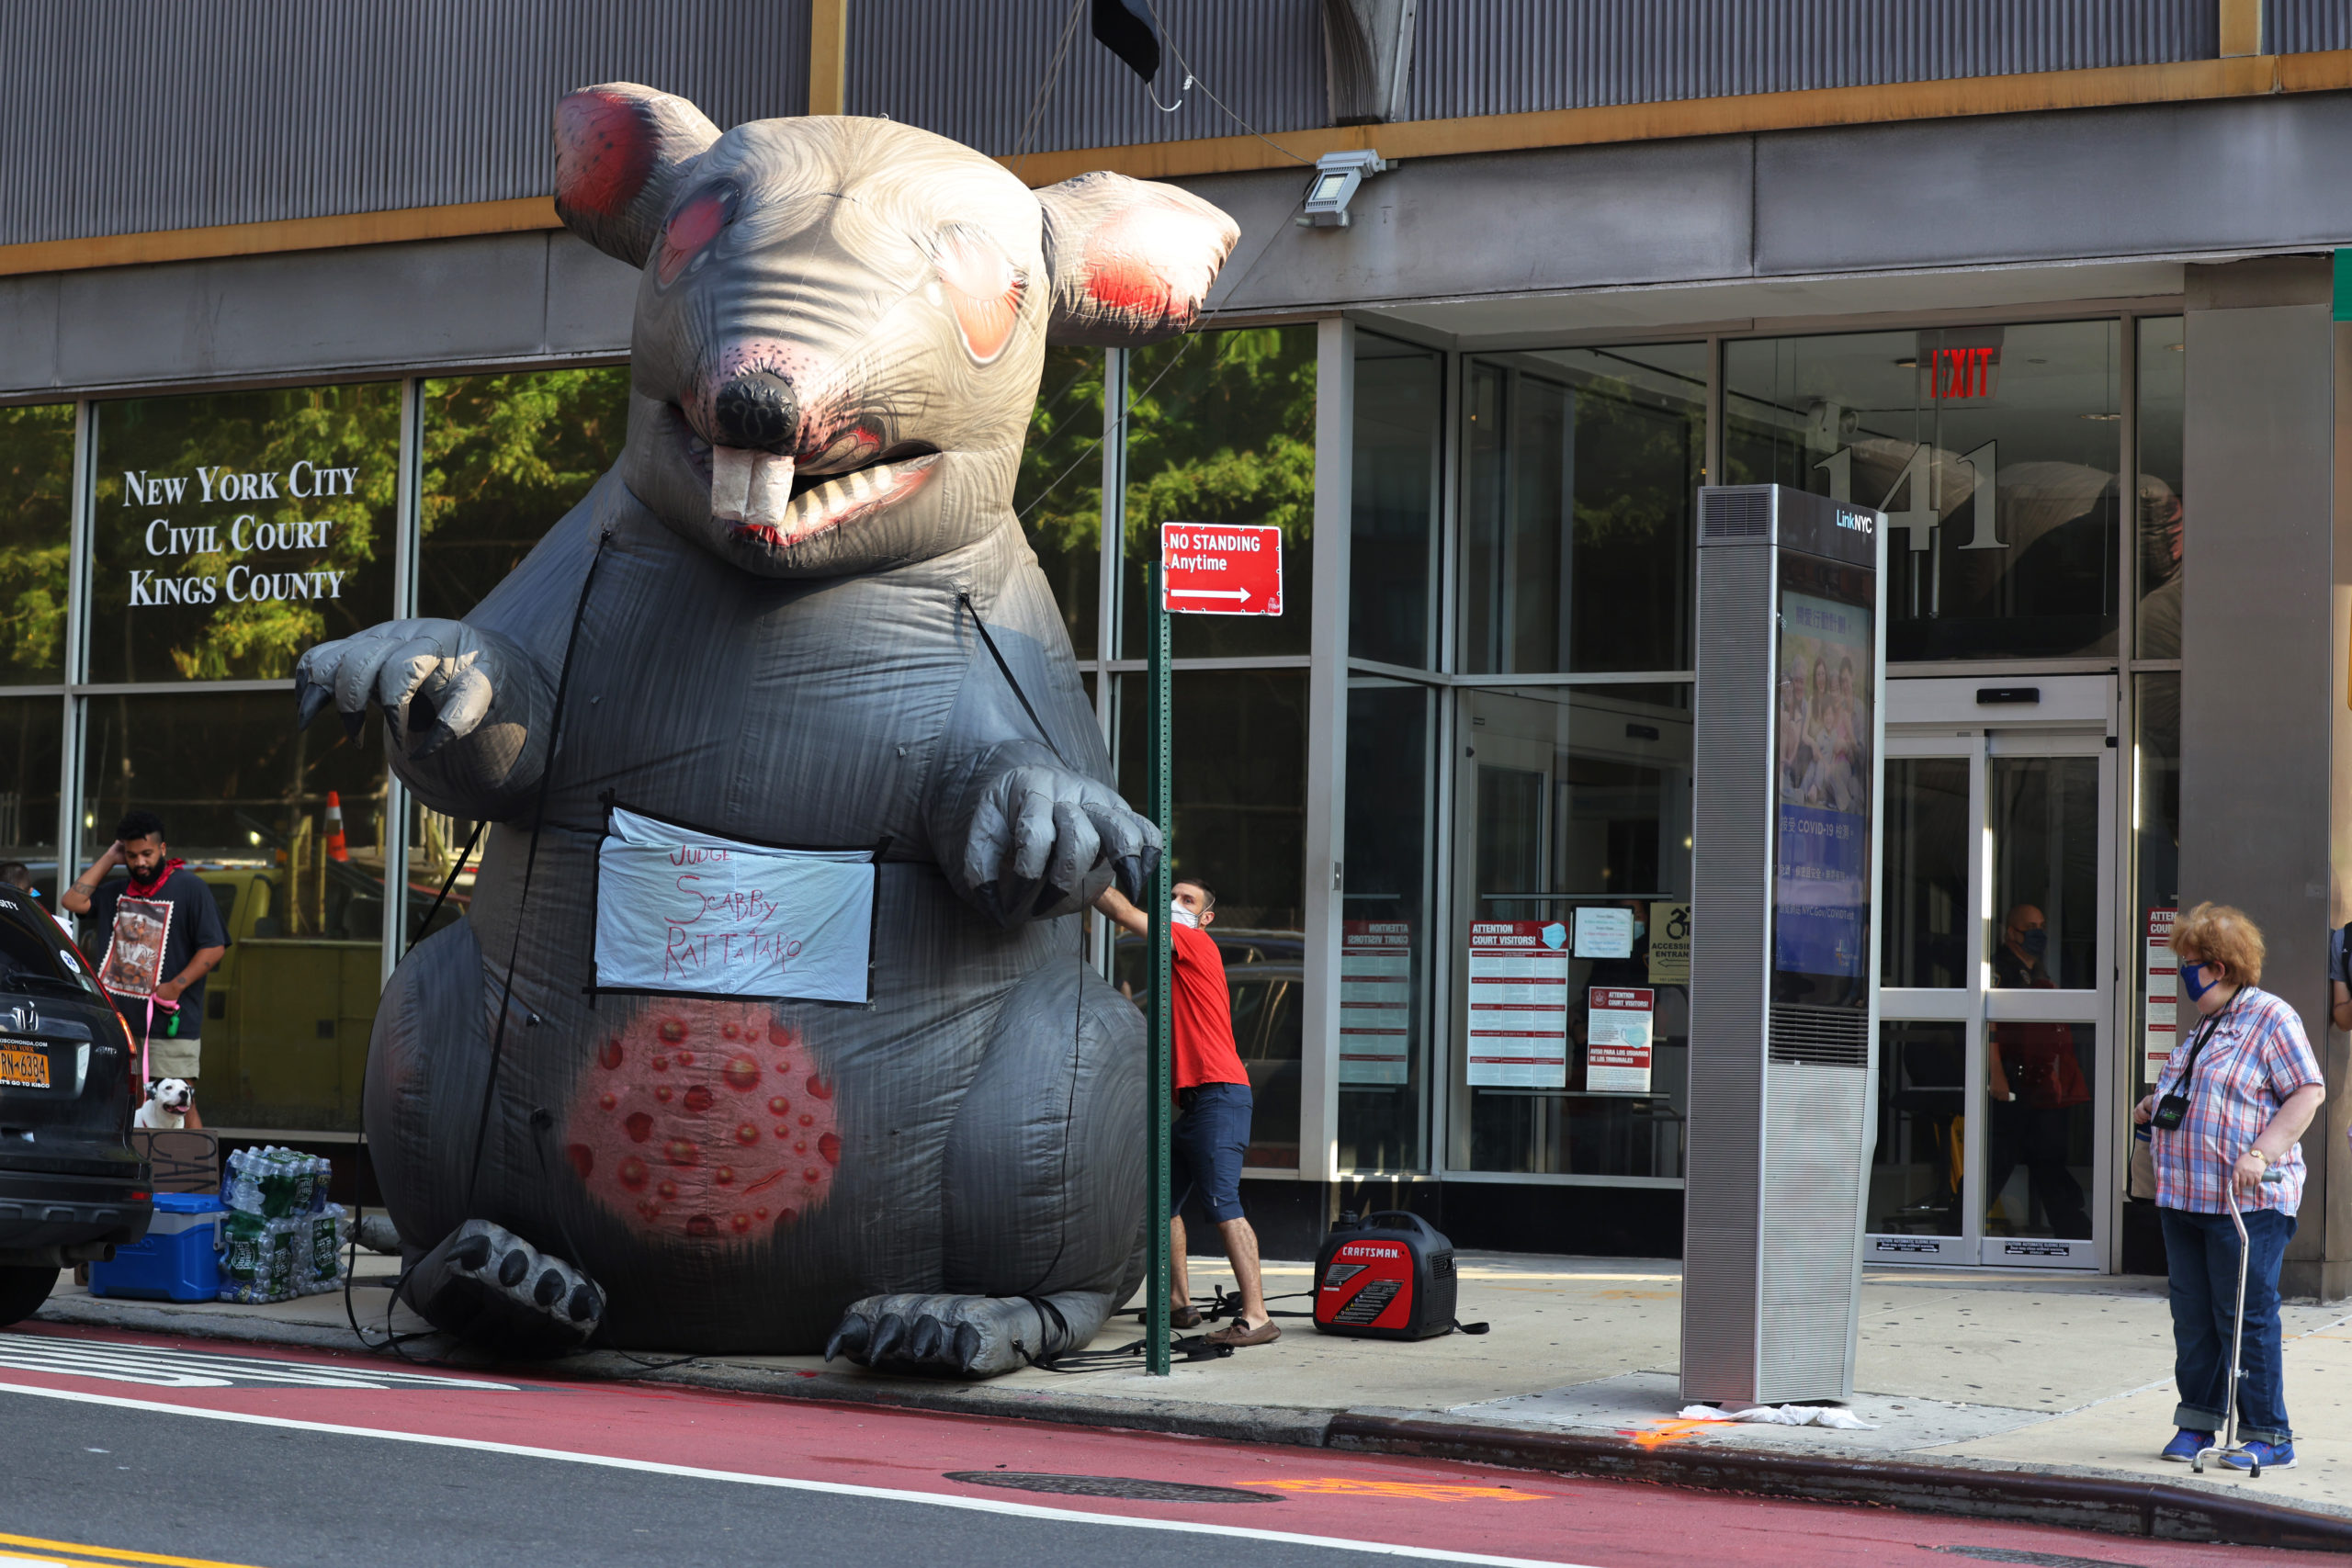 An giant rat is inflated by participants of a 'Resist Evictions' rally to protest evictions on August 10, 2020 in New York City. The Right to Counsel NYC Coalition organized a day of action across New York City for tenants who are struggling to pay rent due to the COVID-19 public health crisis. Gov. Andrew Cuomo extended the eviction moratorium which ended on August 6, for an extra 30 days. (Photo by Michael M. Santiago/Getty Images)